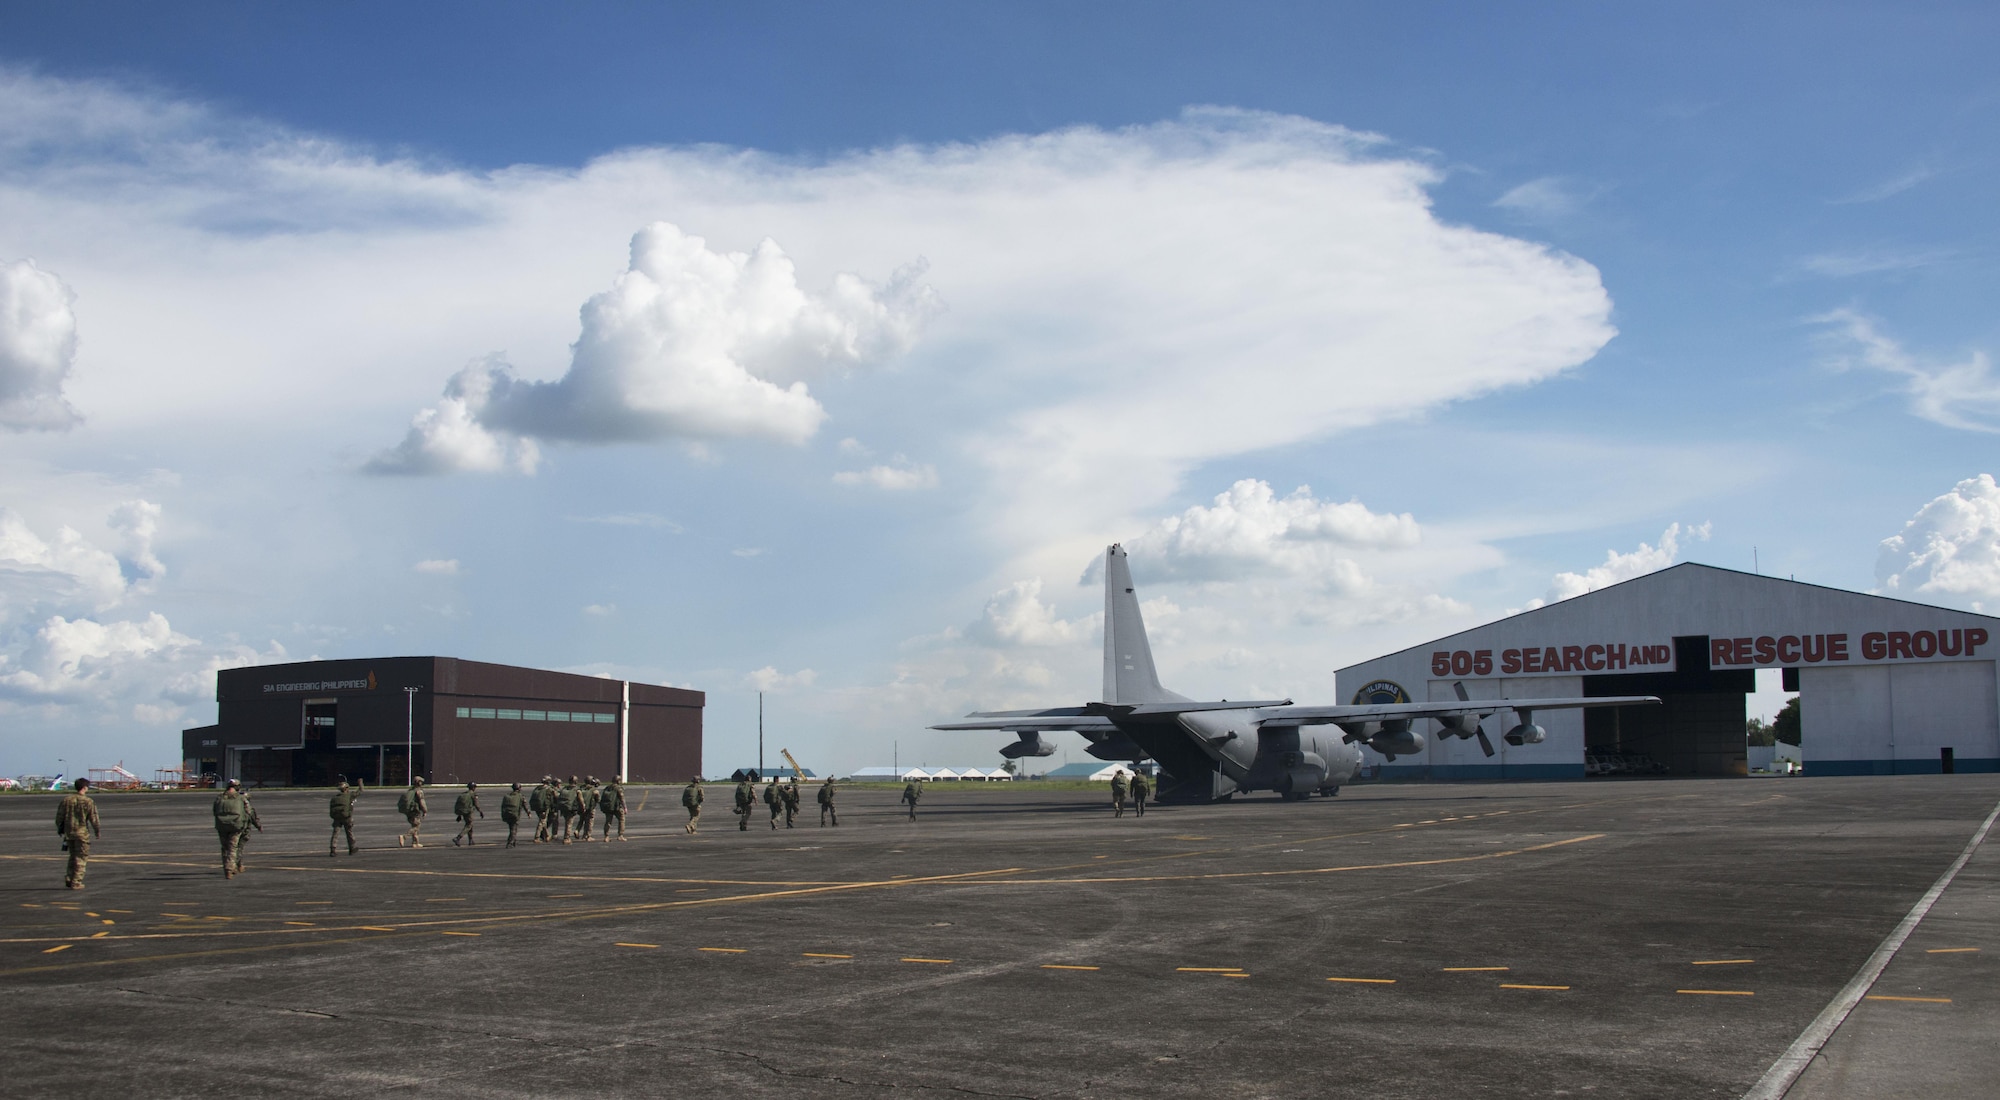 Members from Operational Detachment Alpha (ODA) 1324 and Philippine Army Light Reaction Regiment (LRR) walk to the MC-130H Combat Talon II for high-altitude, low-opening (HALO) airdrops from at Clark Air Base, Sept. 24. ODA 1324 spent six months coordinating with the Joint United States Military Advisory Group (JUSMAG), PACOM Augmentation Team, Special Operations Command Pacific (SOCPAC), and the AFP General Headquarters on a joint, combined HALO airdrop. (U.S. Air Force photo by Capt. Jessica Tait)